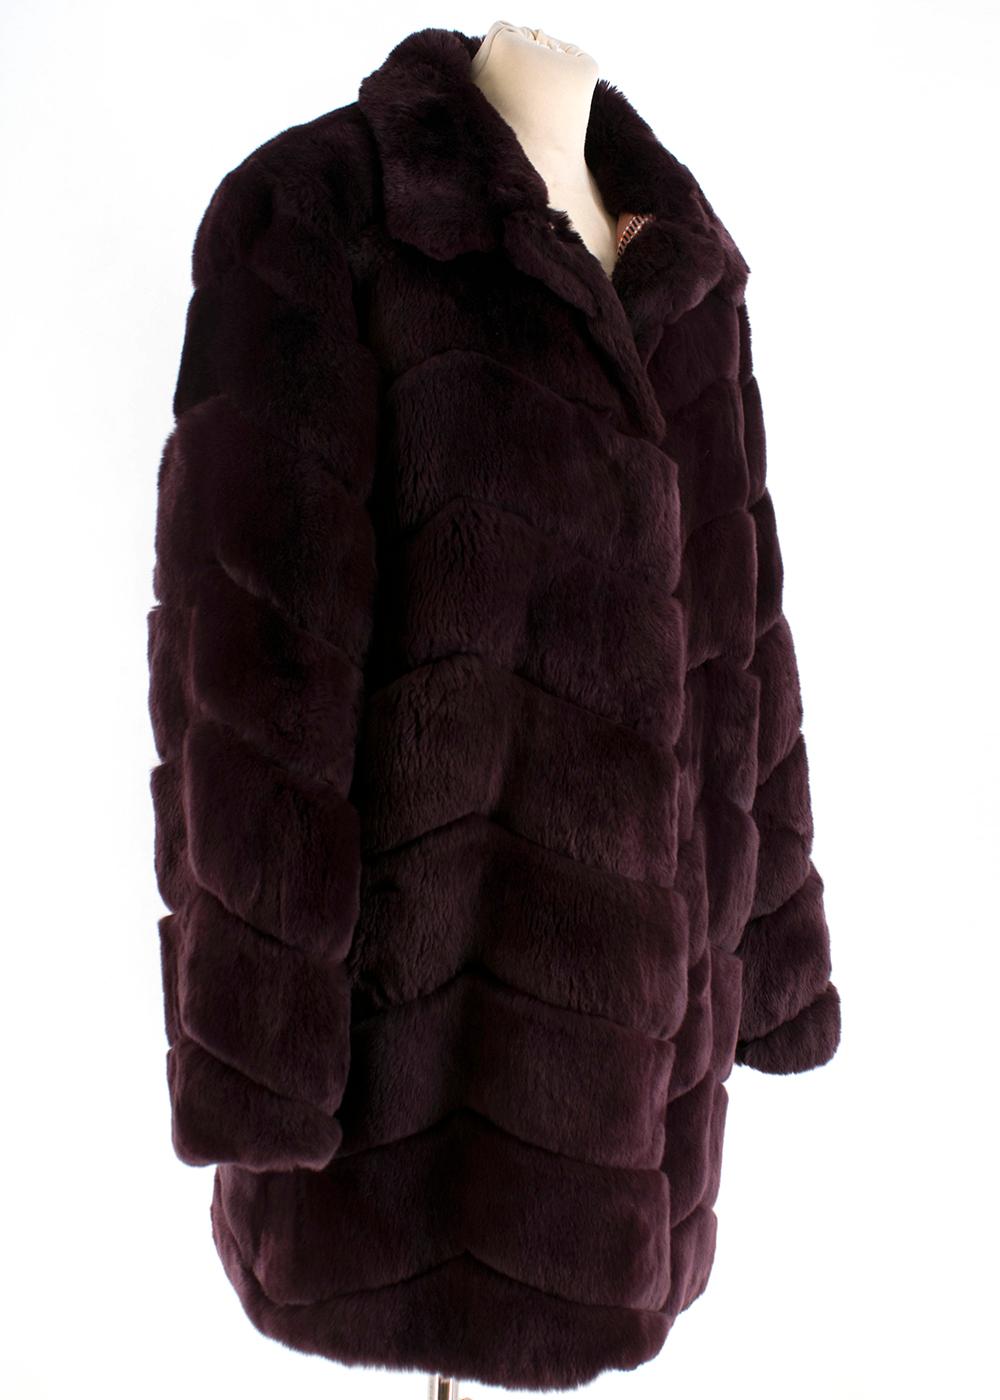 Yves Salomon burgundy rabbit fur coat perfect for the winter days.  RRP £2700

- Button fastening
- Collar
- Two side pockets
- Mid length

Please note, these items are pre-owned and may show signs of being stored even when unworn and unused. This